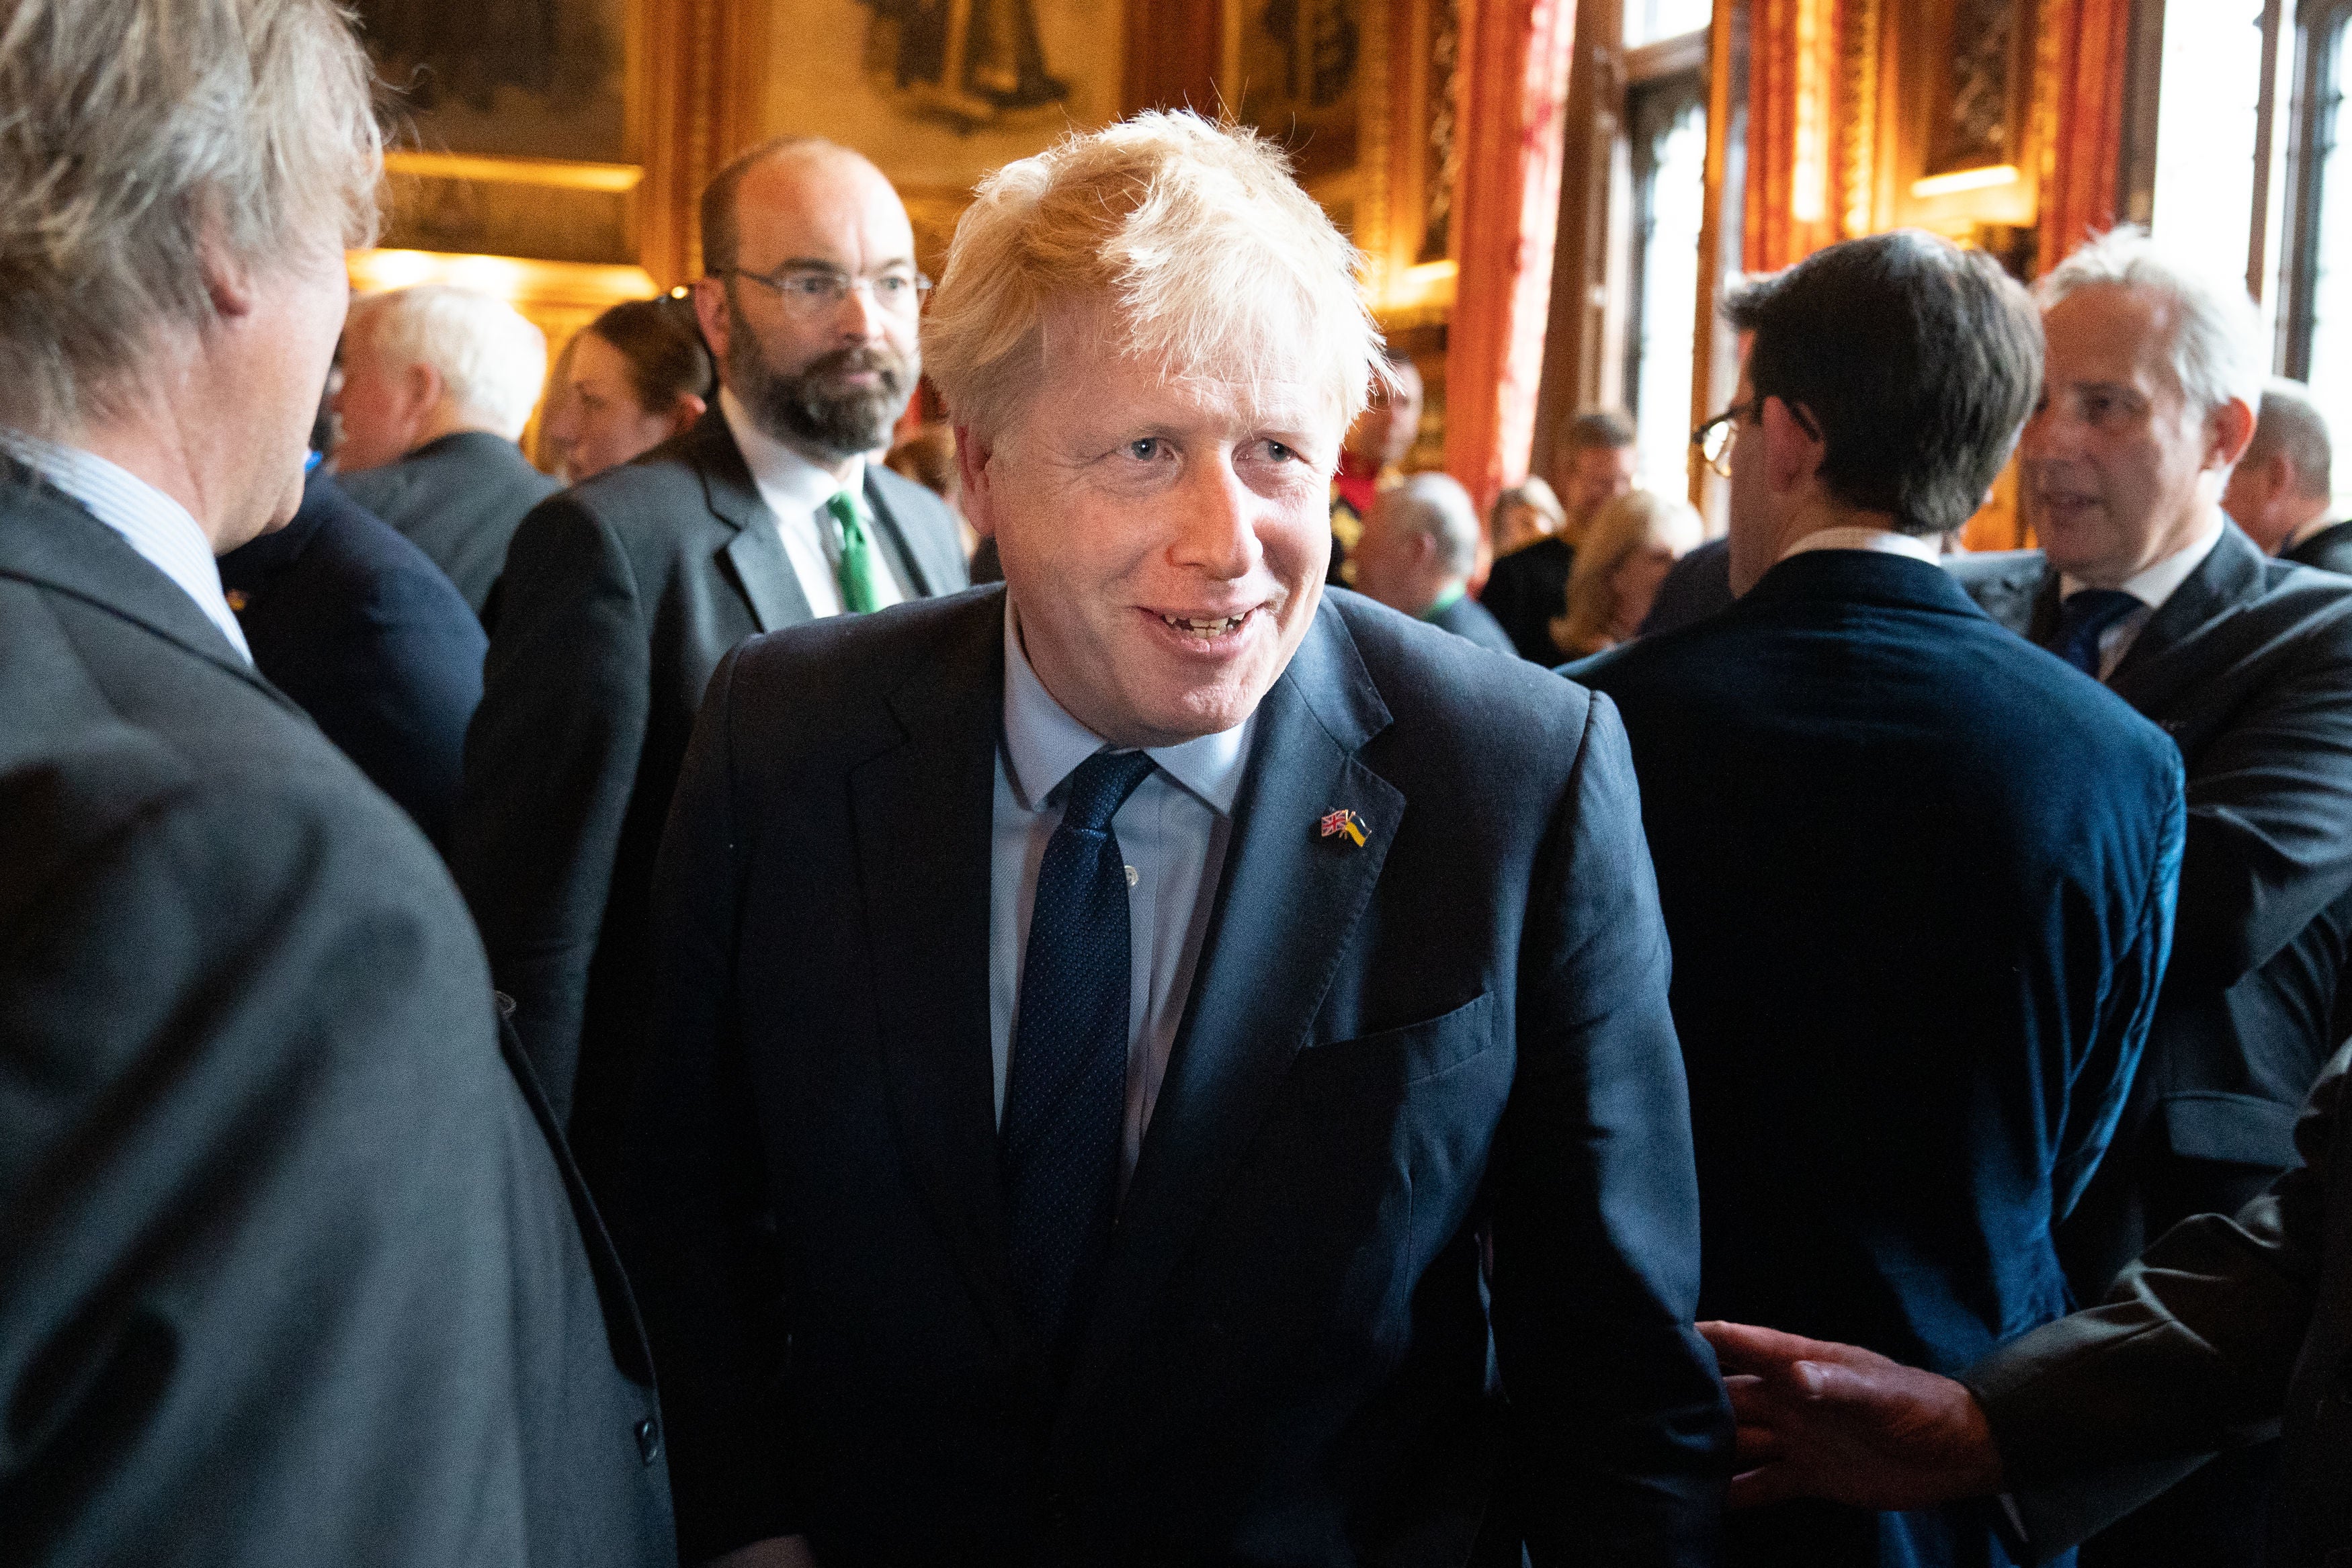 Boris Johnson meets Falklands veterans at the Palace of Westminster on Tuesday 7 June at an event commemorating the 40th anniversary of the war